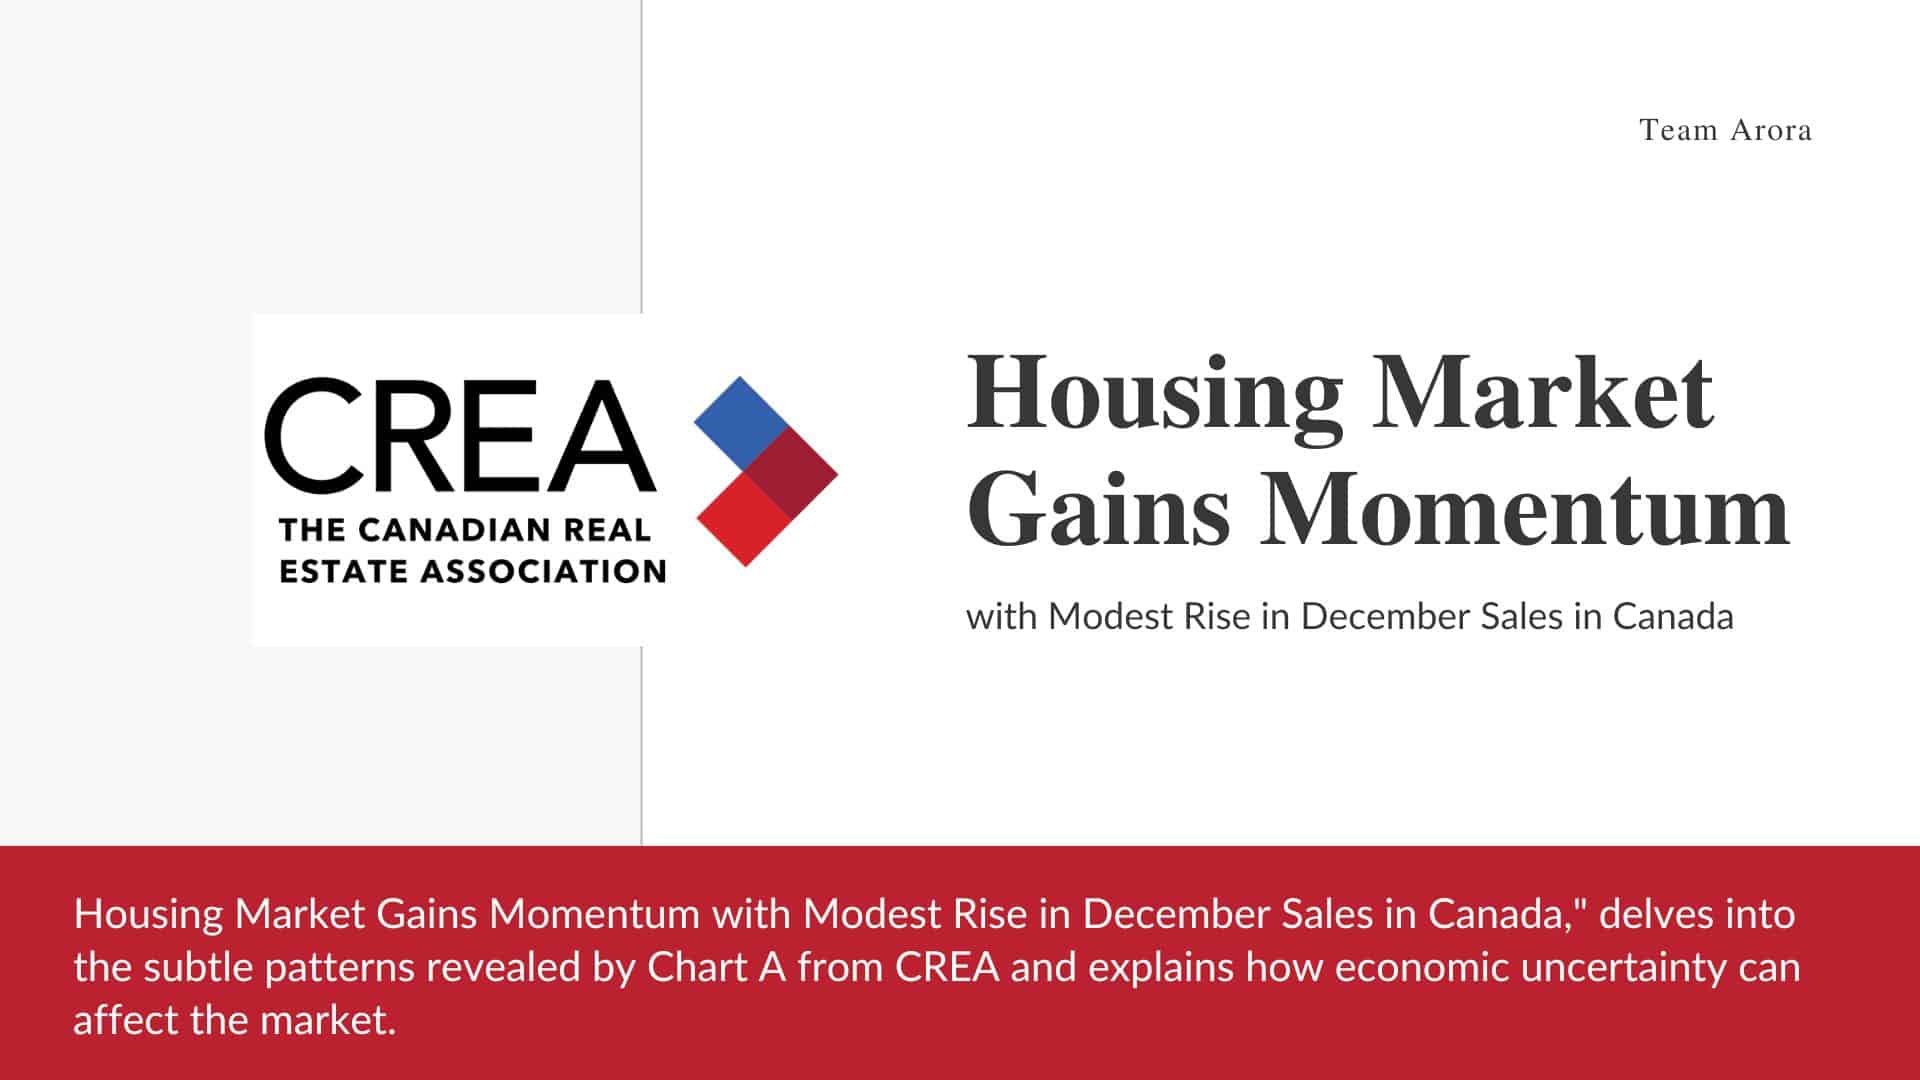 Housing Market Gains Momentum with Modest Rise in December Sales in Canada